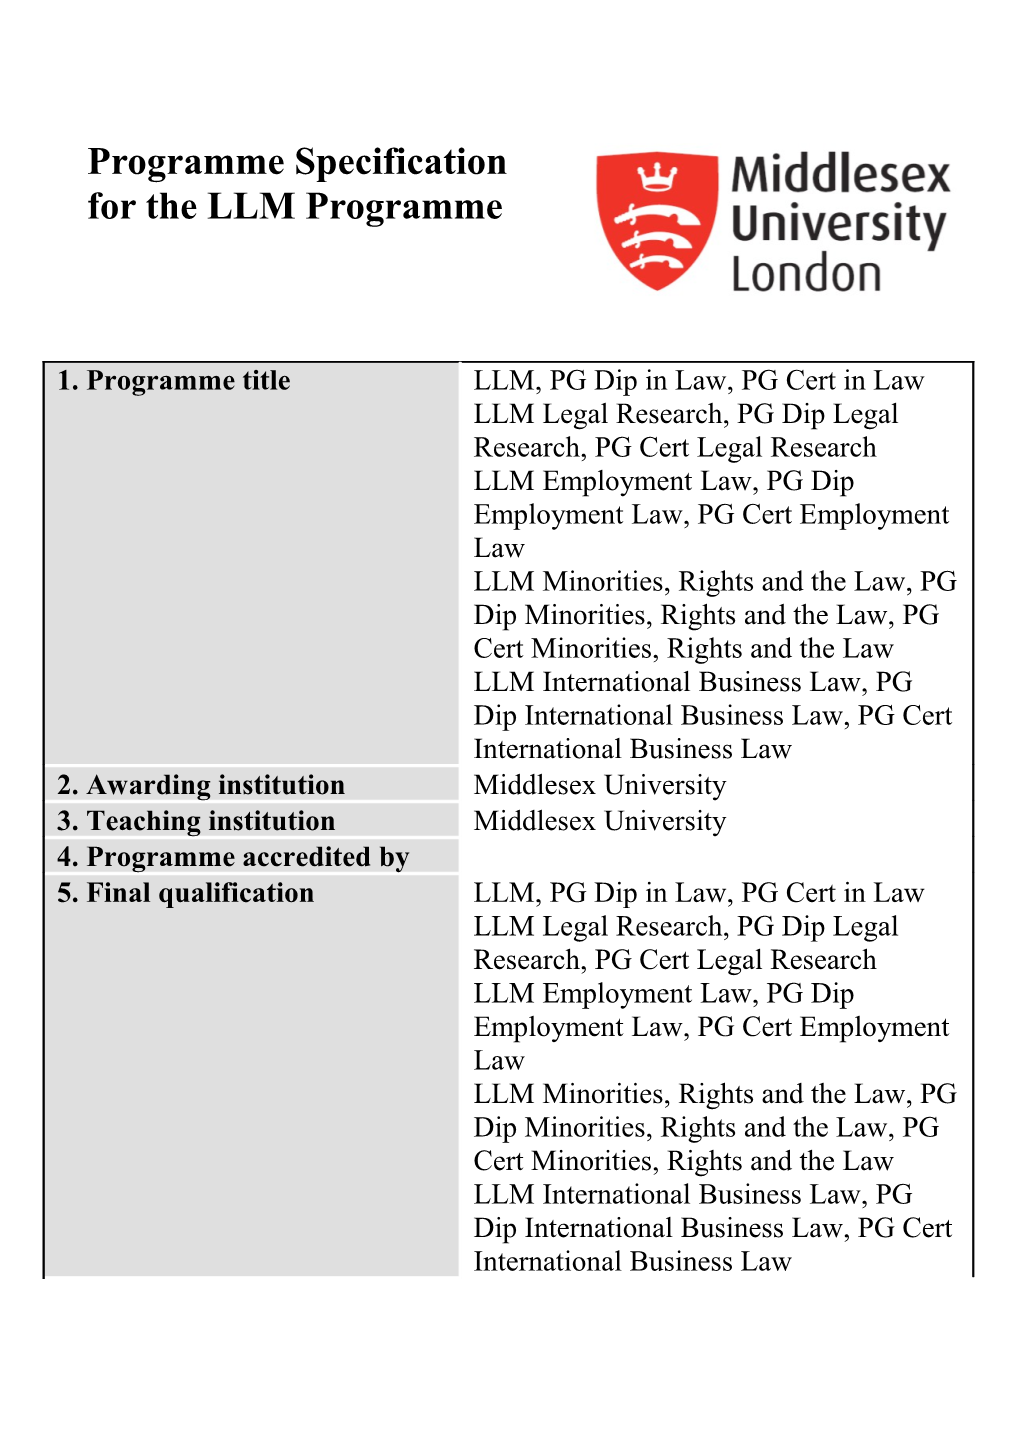 For the LLM Programme